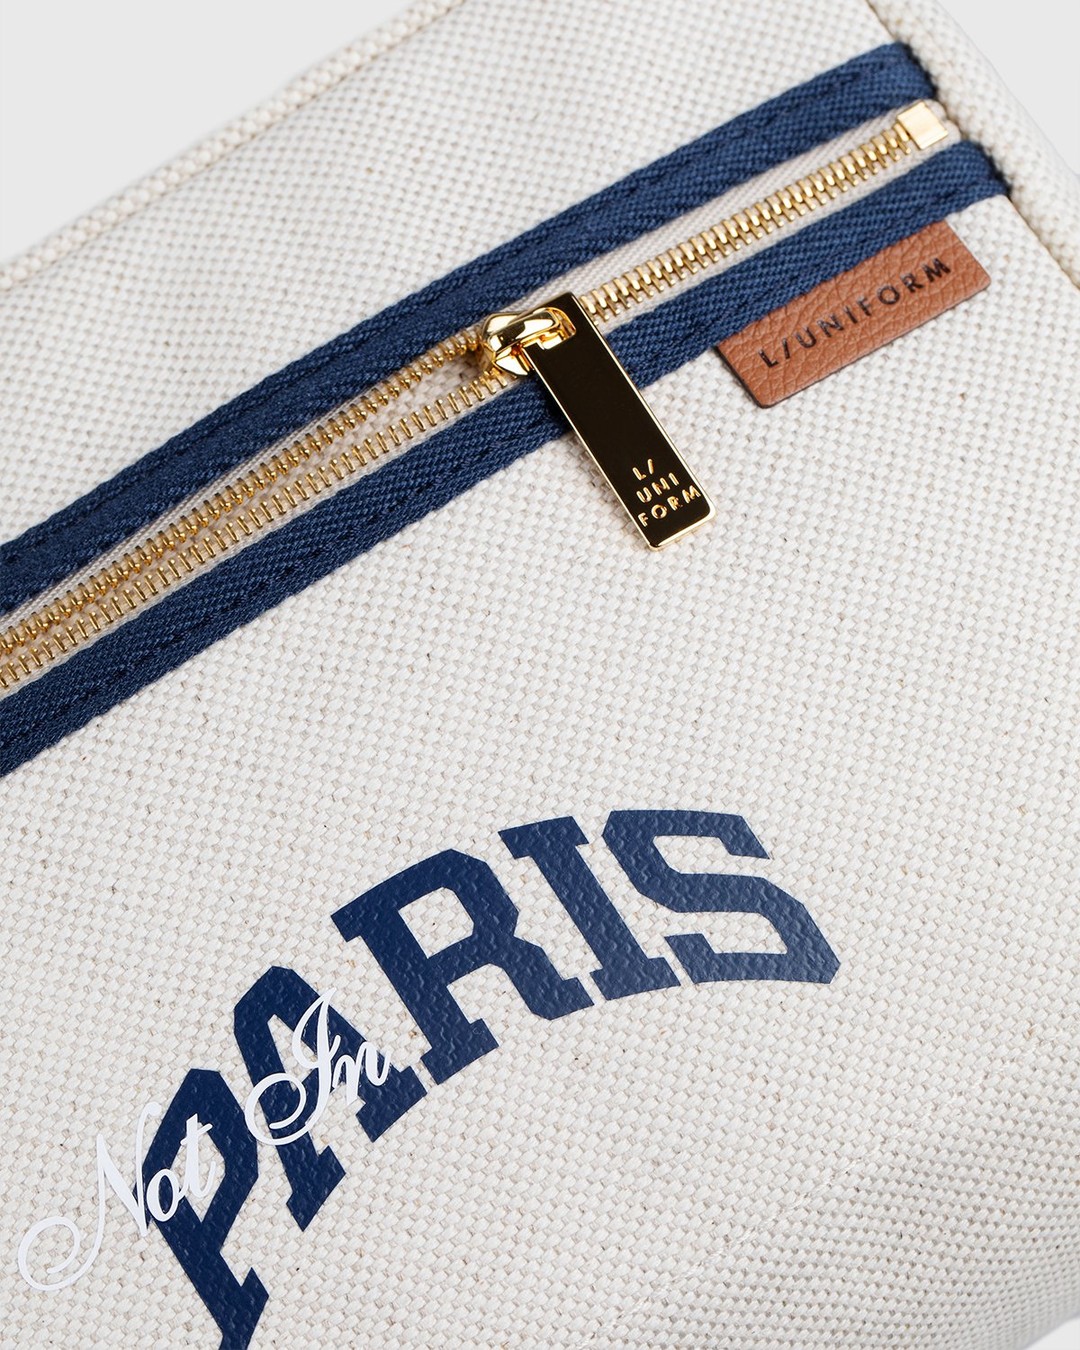 L/UNIFORM x Highsnobiety – Toiletry Bag - Cosmetic Cases - Beige - Image 3